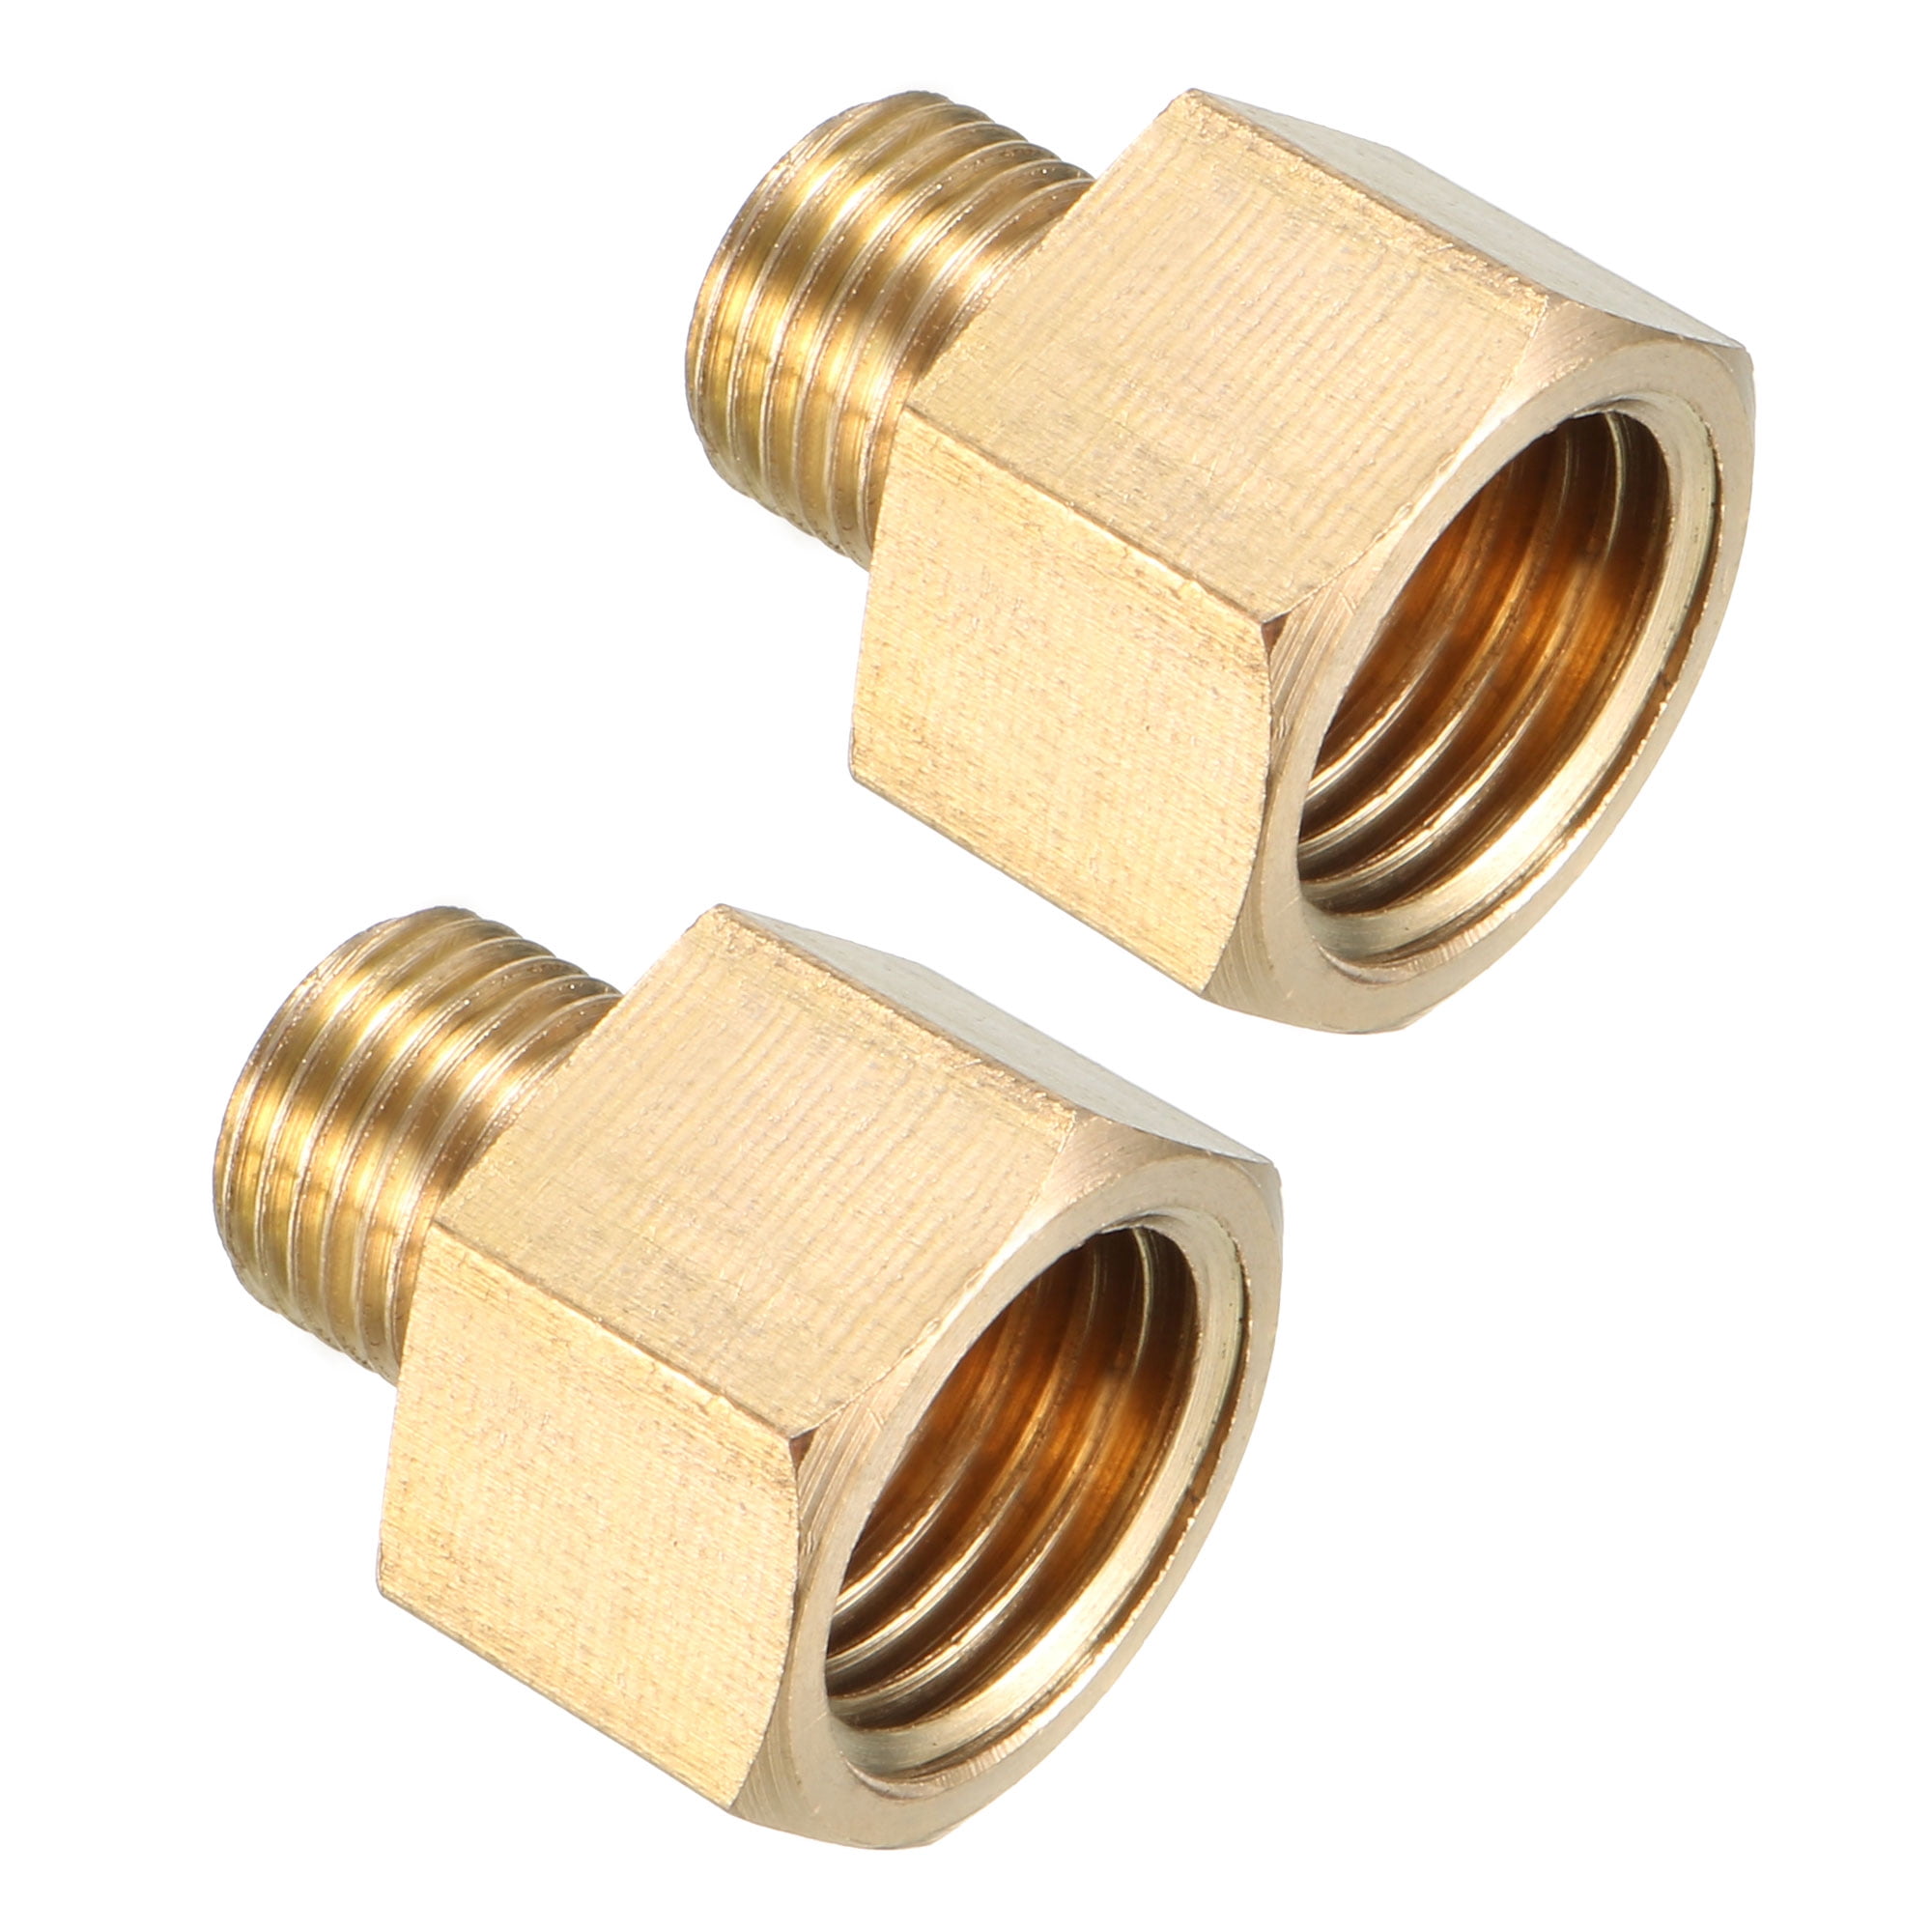 1Pcs 2 ways φ8-1/8 BSP House Barbed Elbow Male Brass Pipe Coupler Adapter 